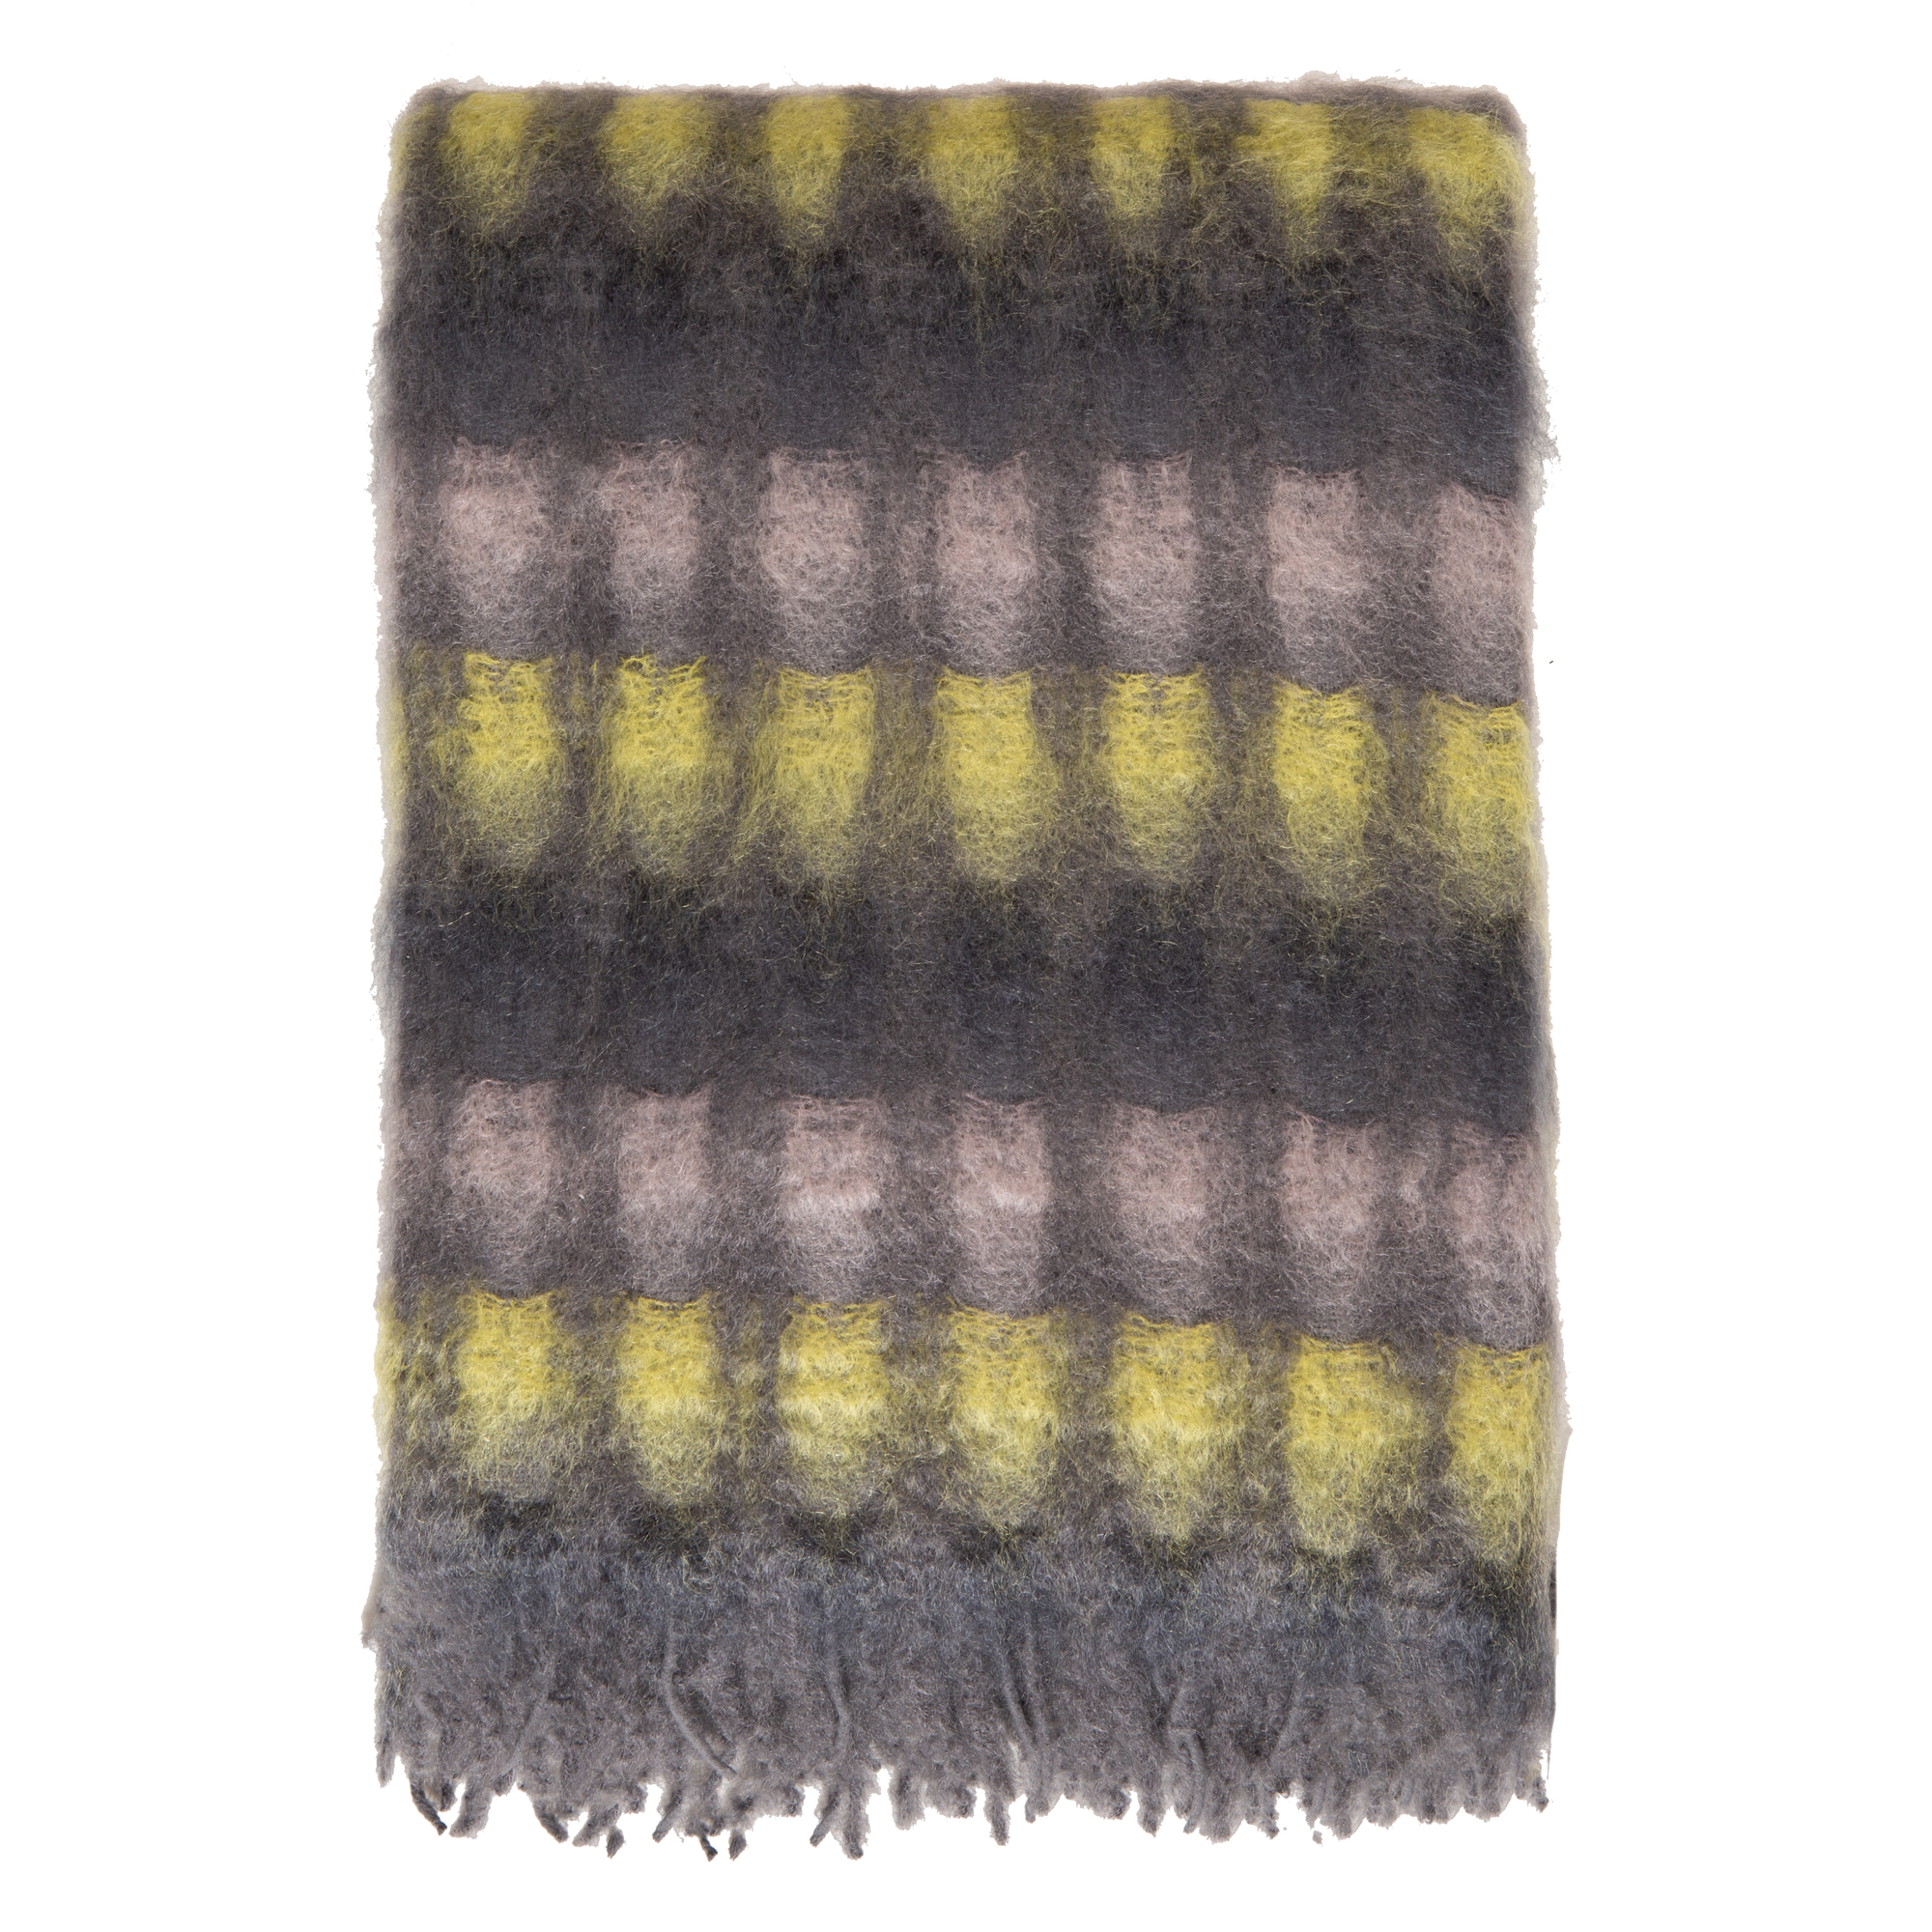 Combining two luxurious specialty yarns, the Merino/Mohair Throw is the perfect blend of merino wool and mohair which provides exceptional softness and warmth while being lighter t